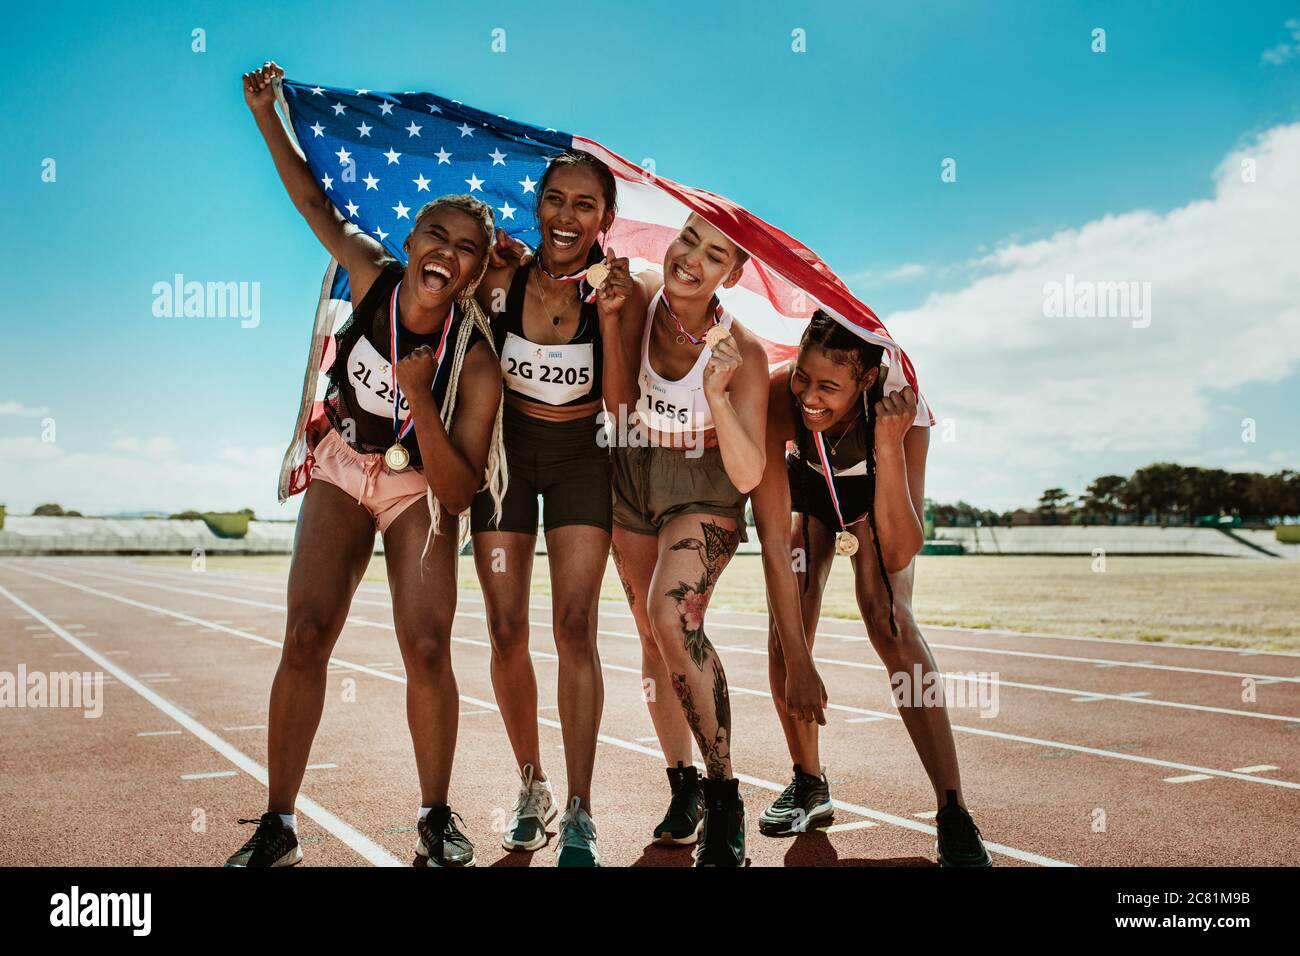 Portrait of young team of female athletes enjoying victory. Diverse group of runners with medals celebrating success holding a USA flag on racetrack. Stock Photo